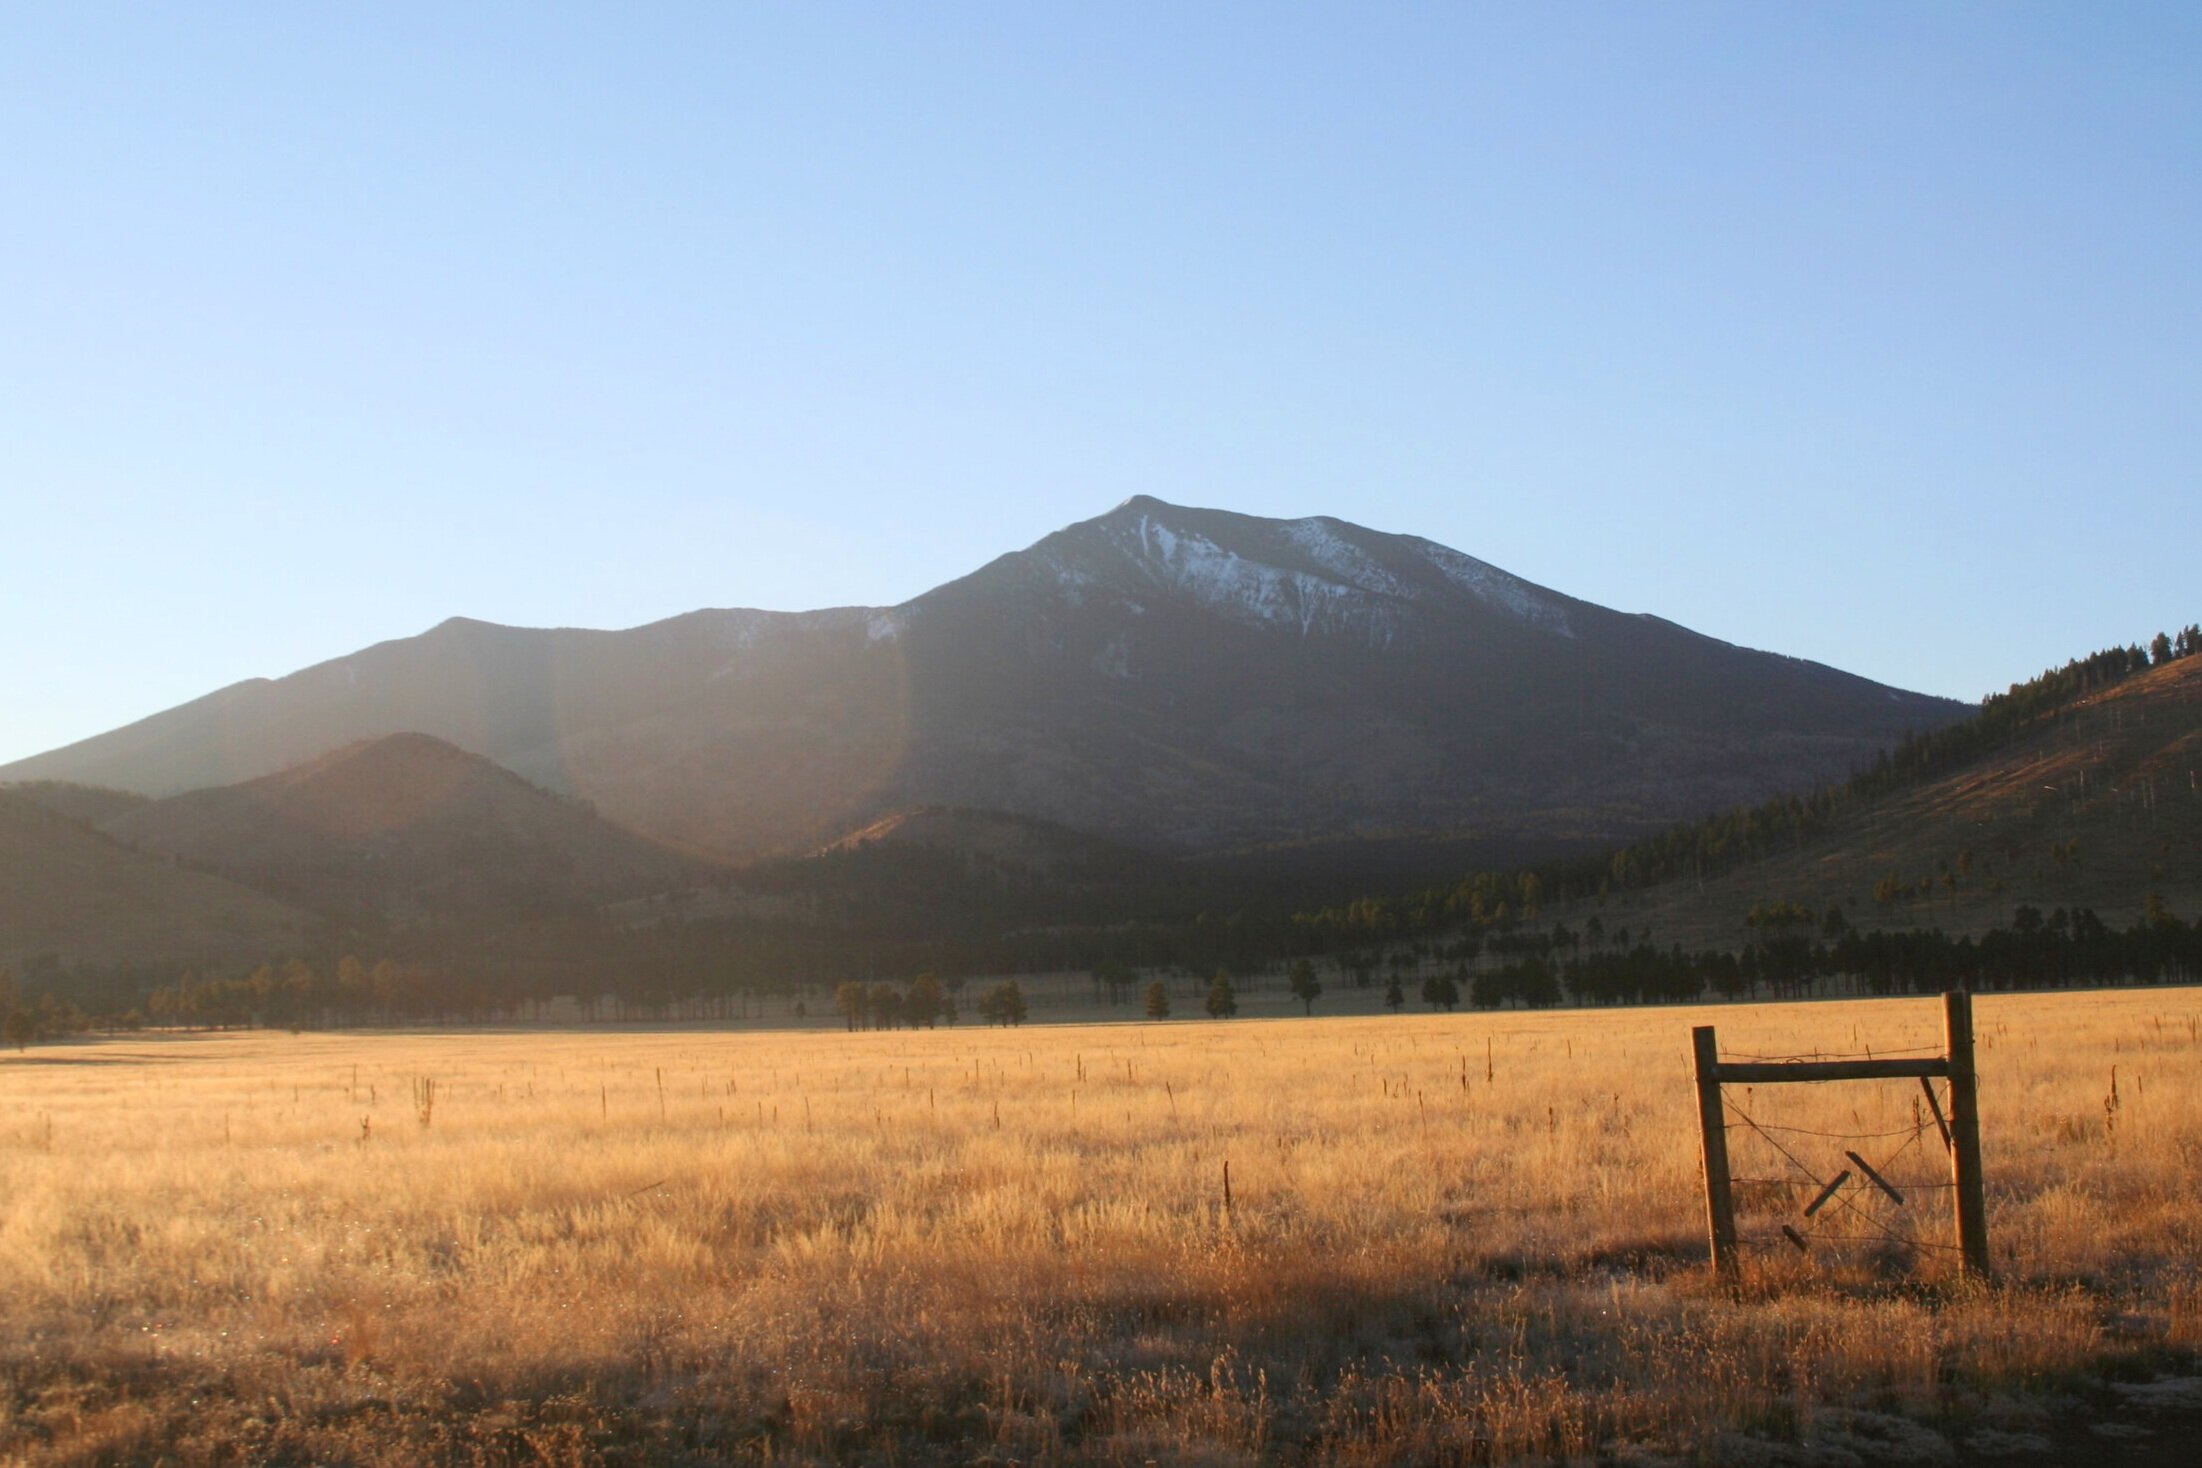   An incredible morning view of the San Francisco Peaks.  